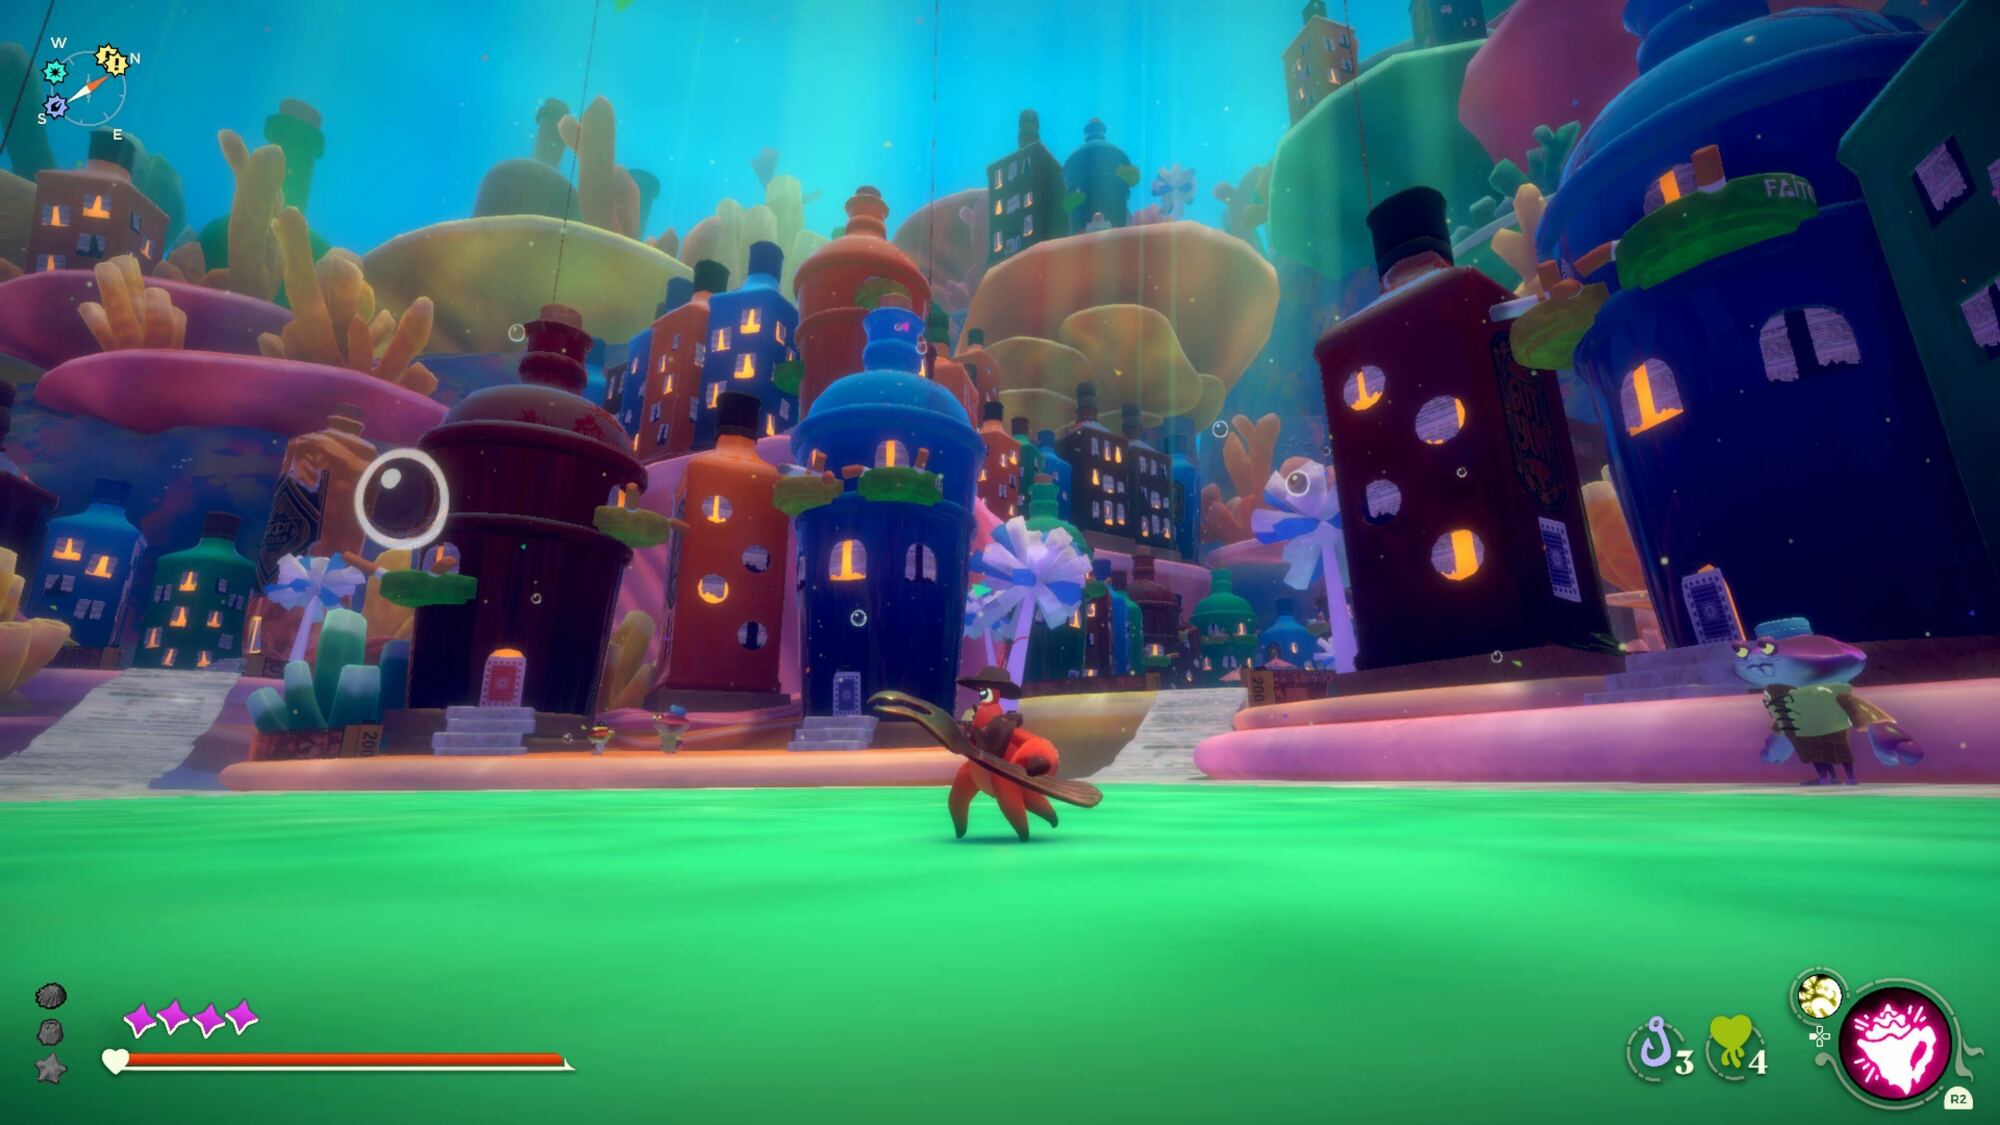 A vibrant, cartoon-like underwater cityscape with coral structures and whimsical buildings, with the red crab character in the foreground.